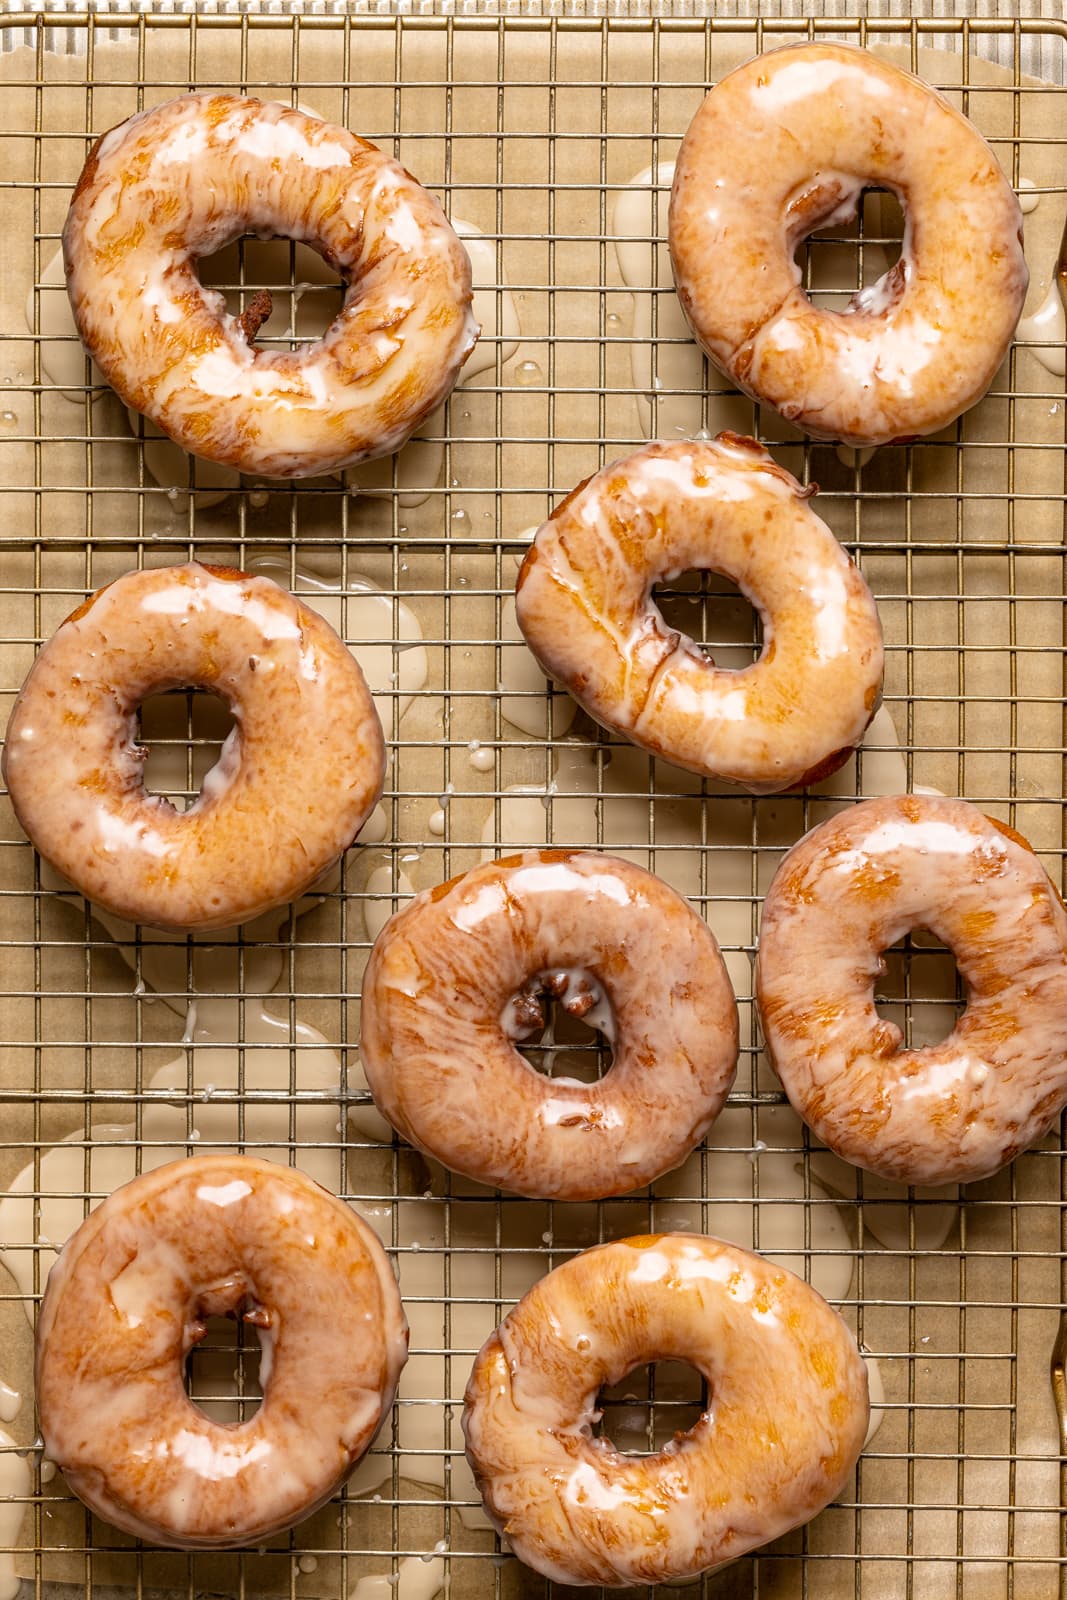 Baked glazed donuts on a baking sheet with a wire rack.